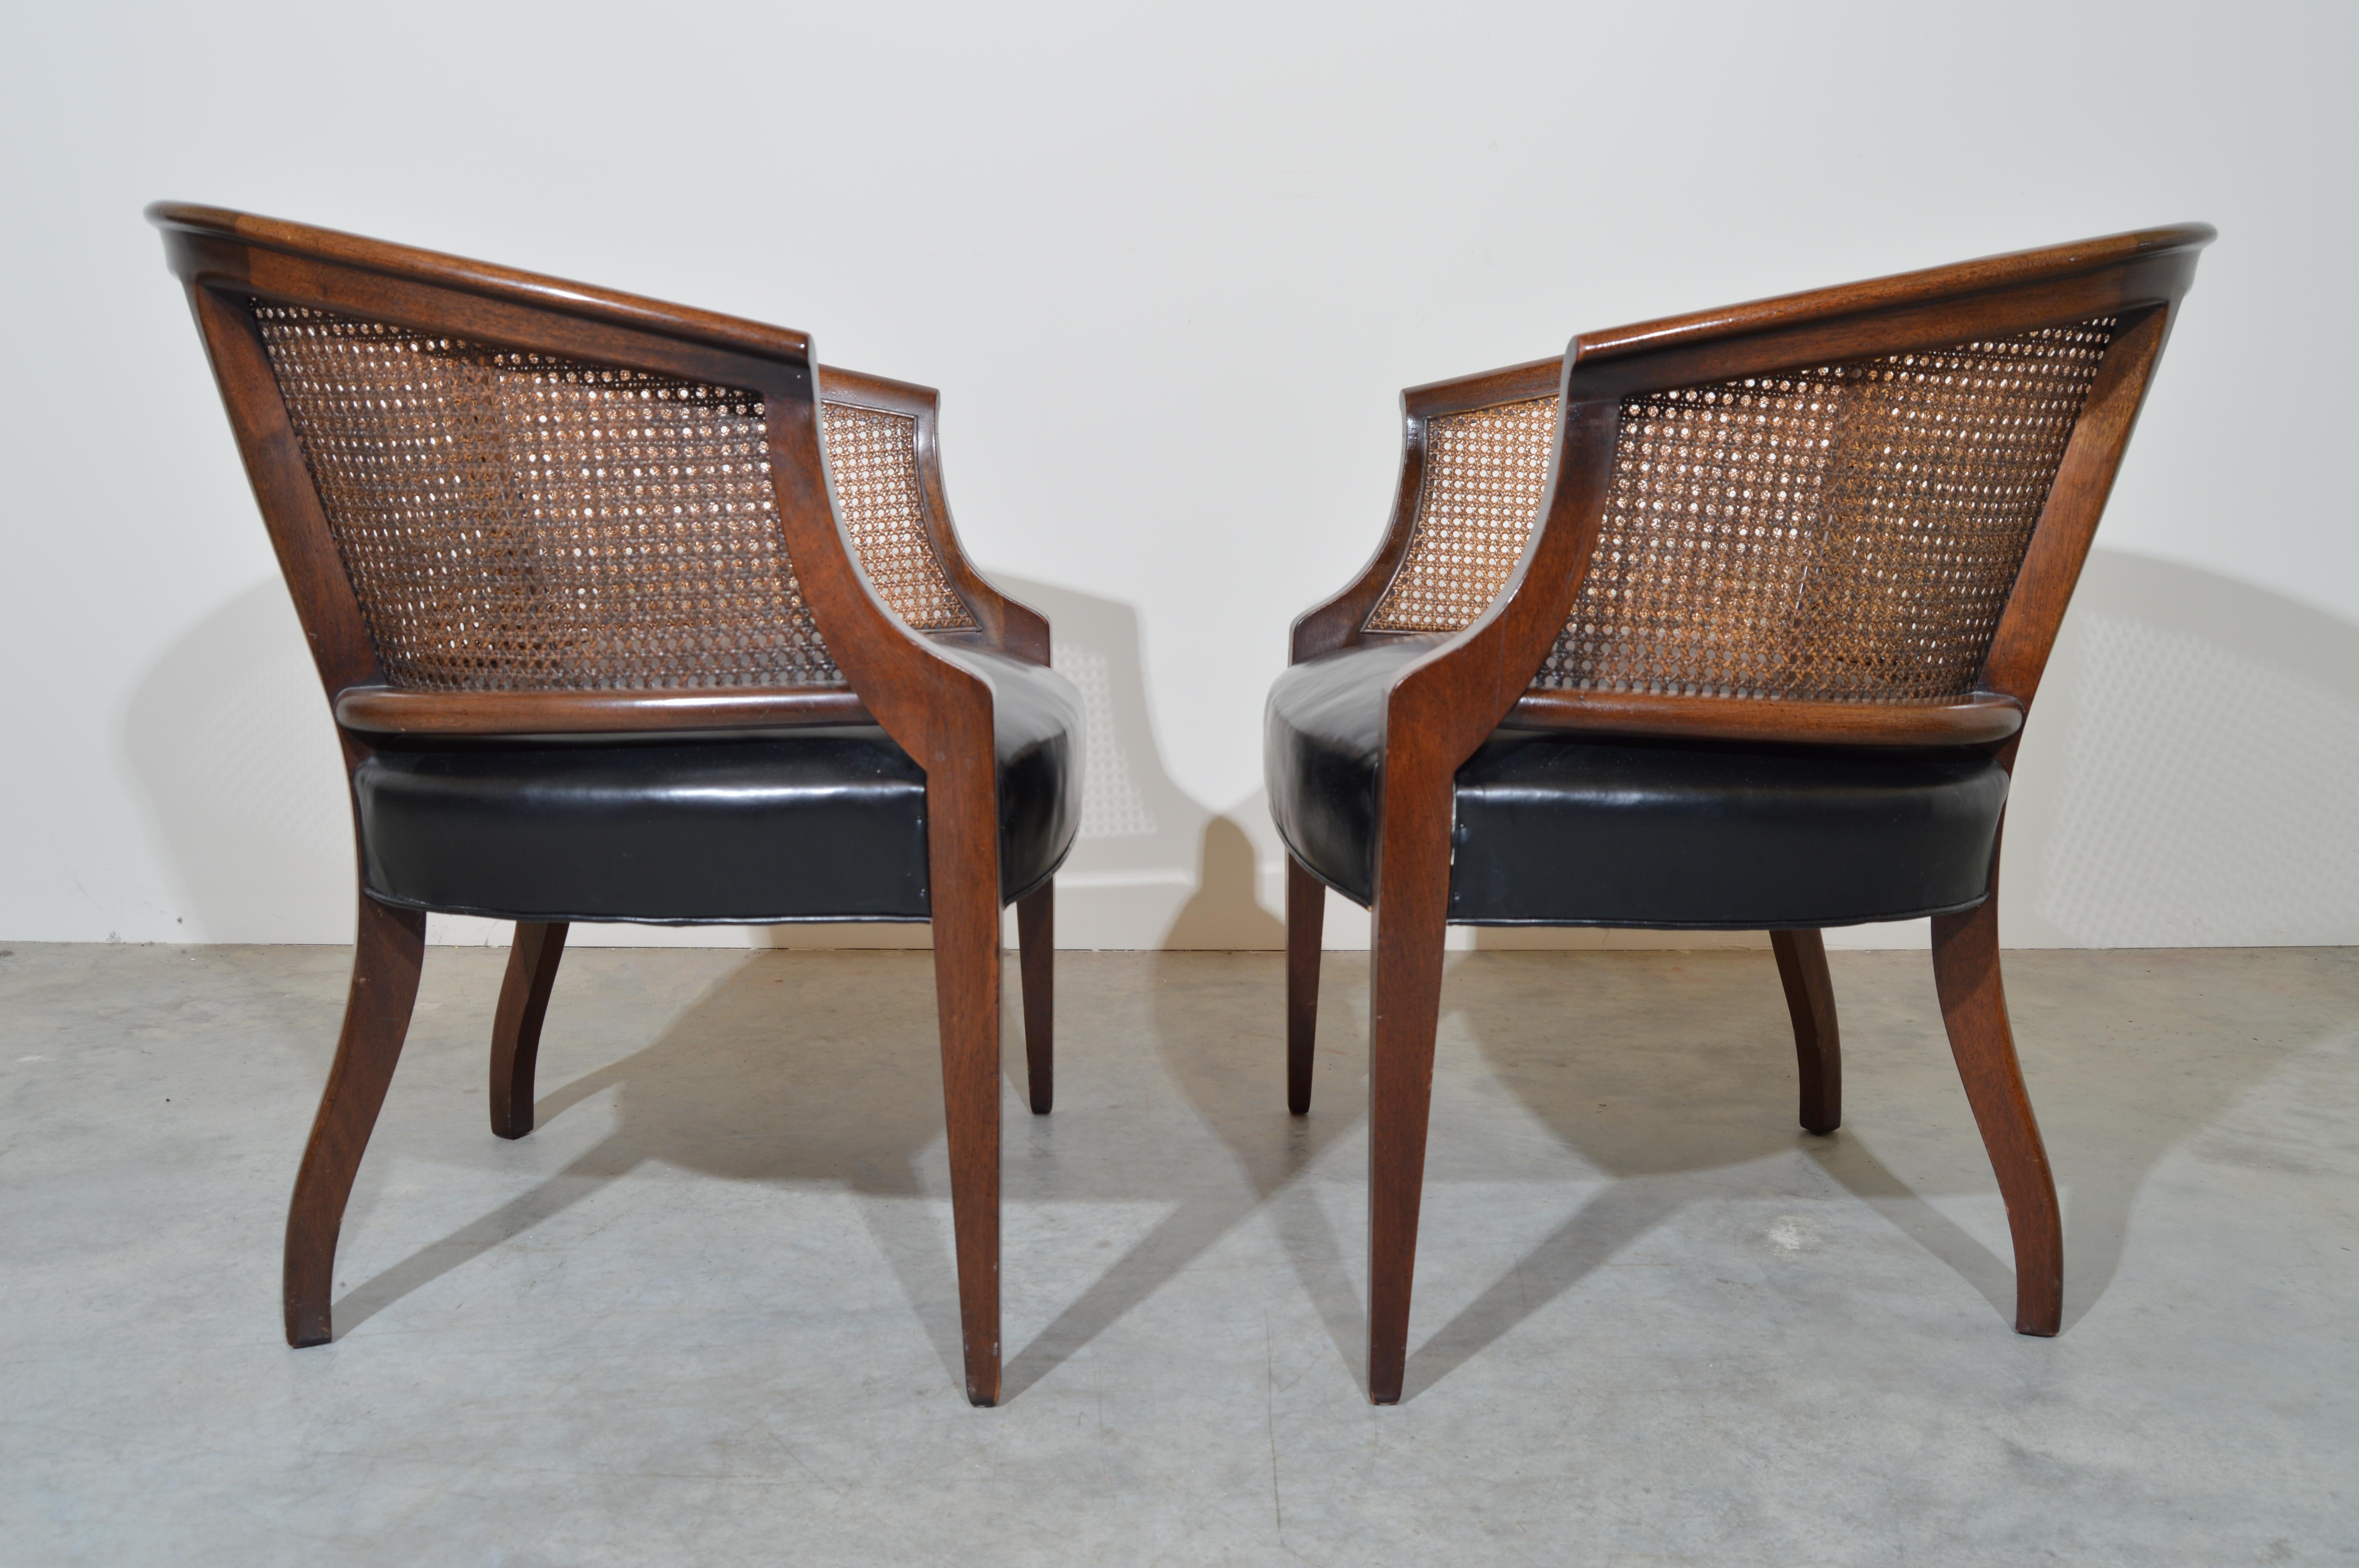 American Pair of Regency Hickory Chair Co. Cane Barrel Back Club Chairs Having Lithe Legs